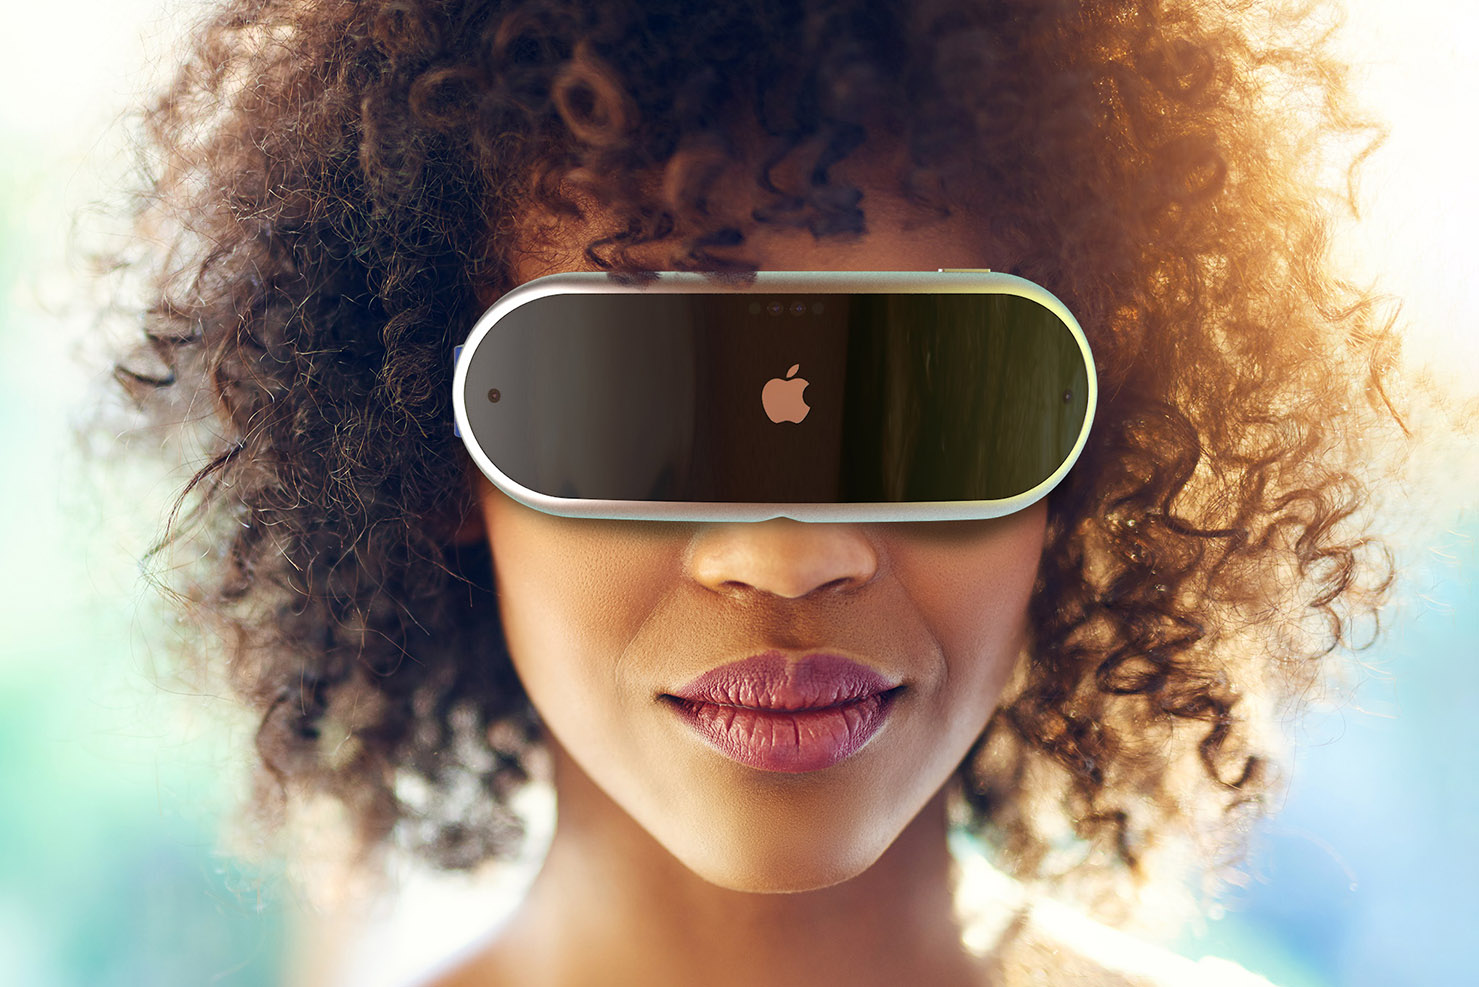 Apple's Augmented Reality Headset May Launch In 2022